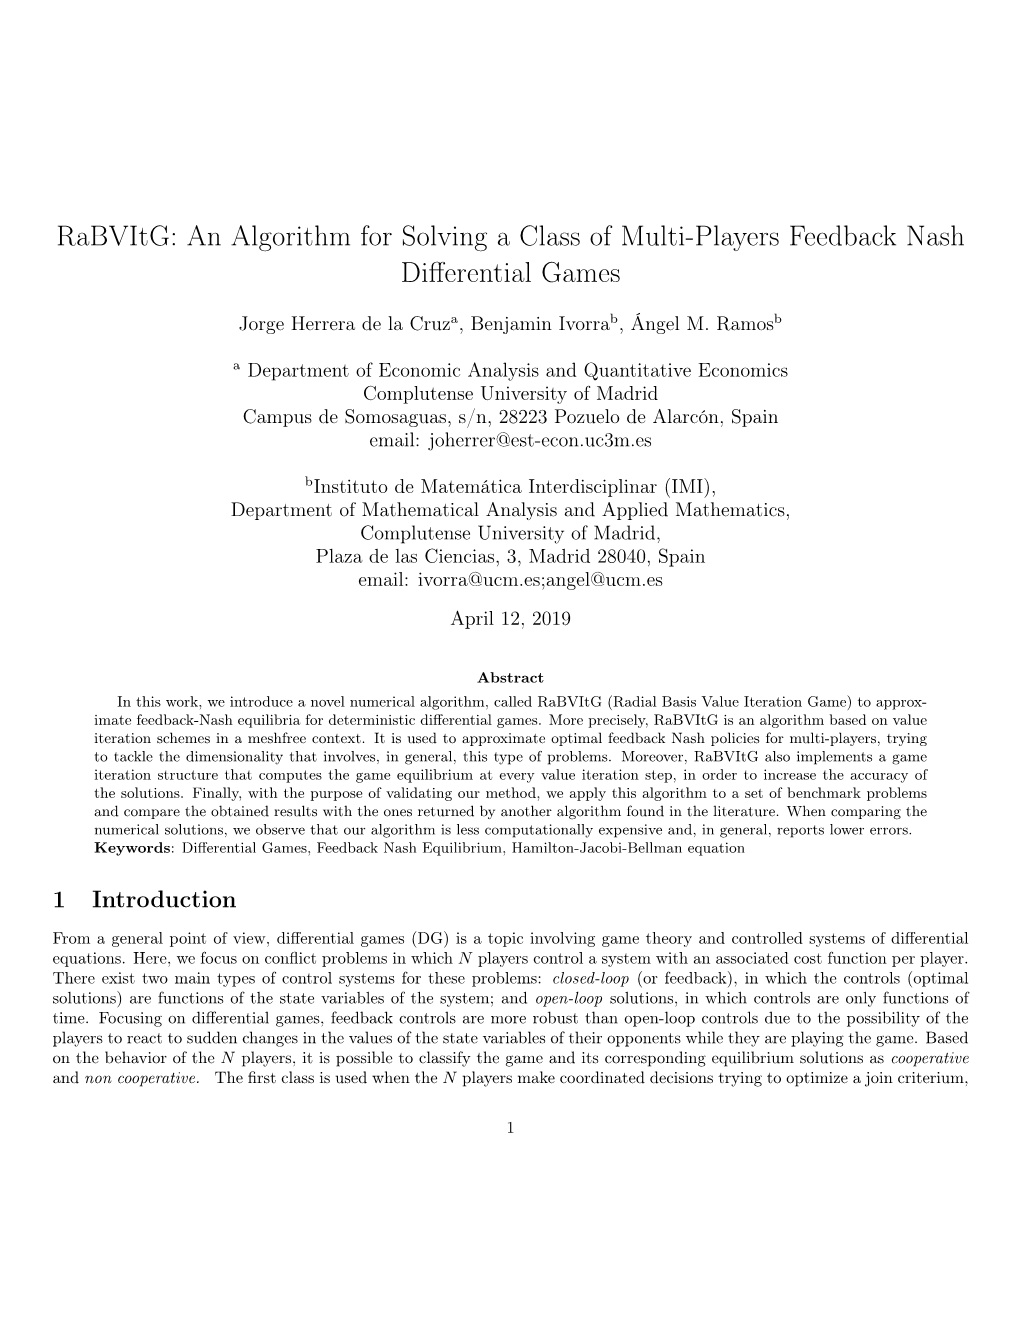 An Algorithm for Solving a Class of Multi-Players Feedback Nash Diﬀerential Games